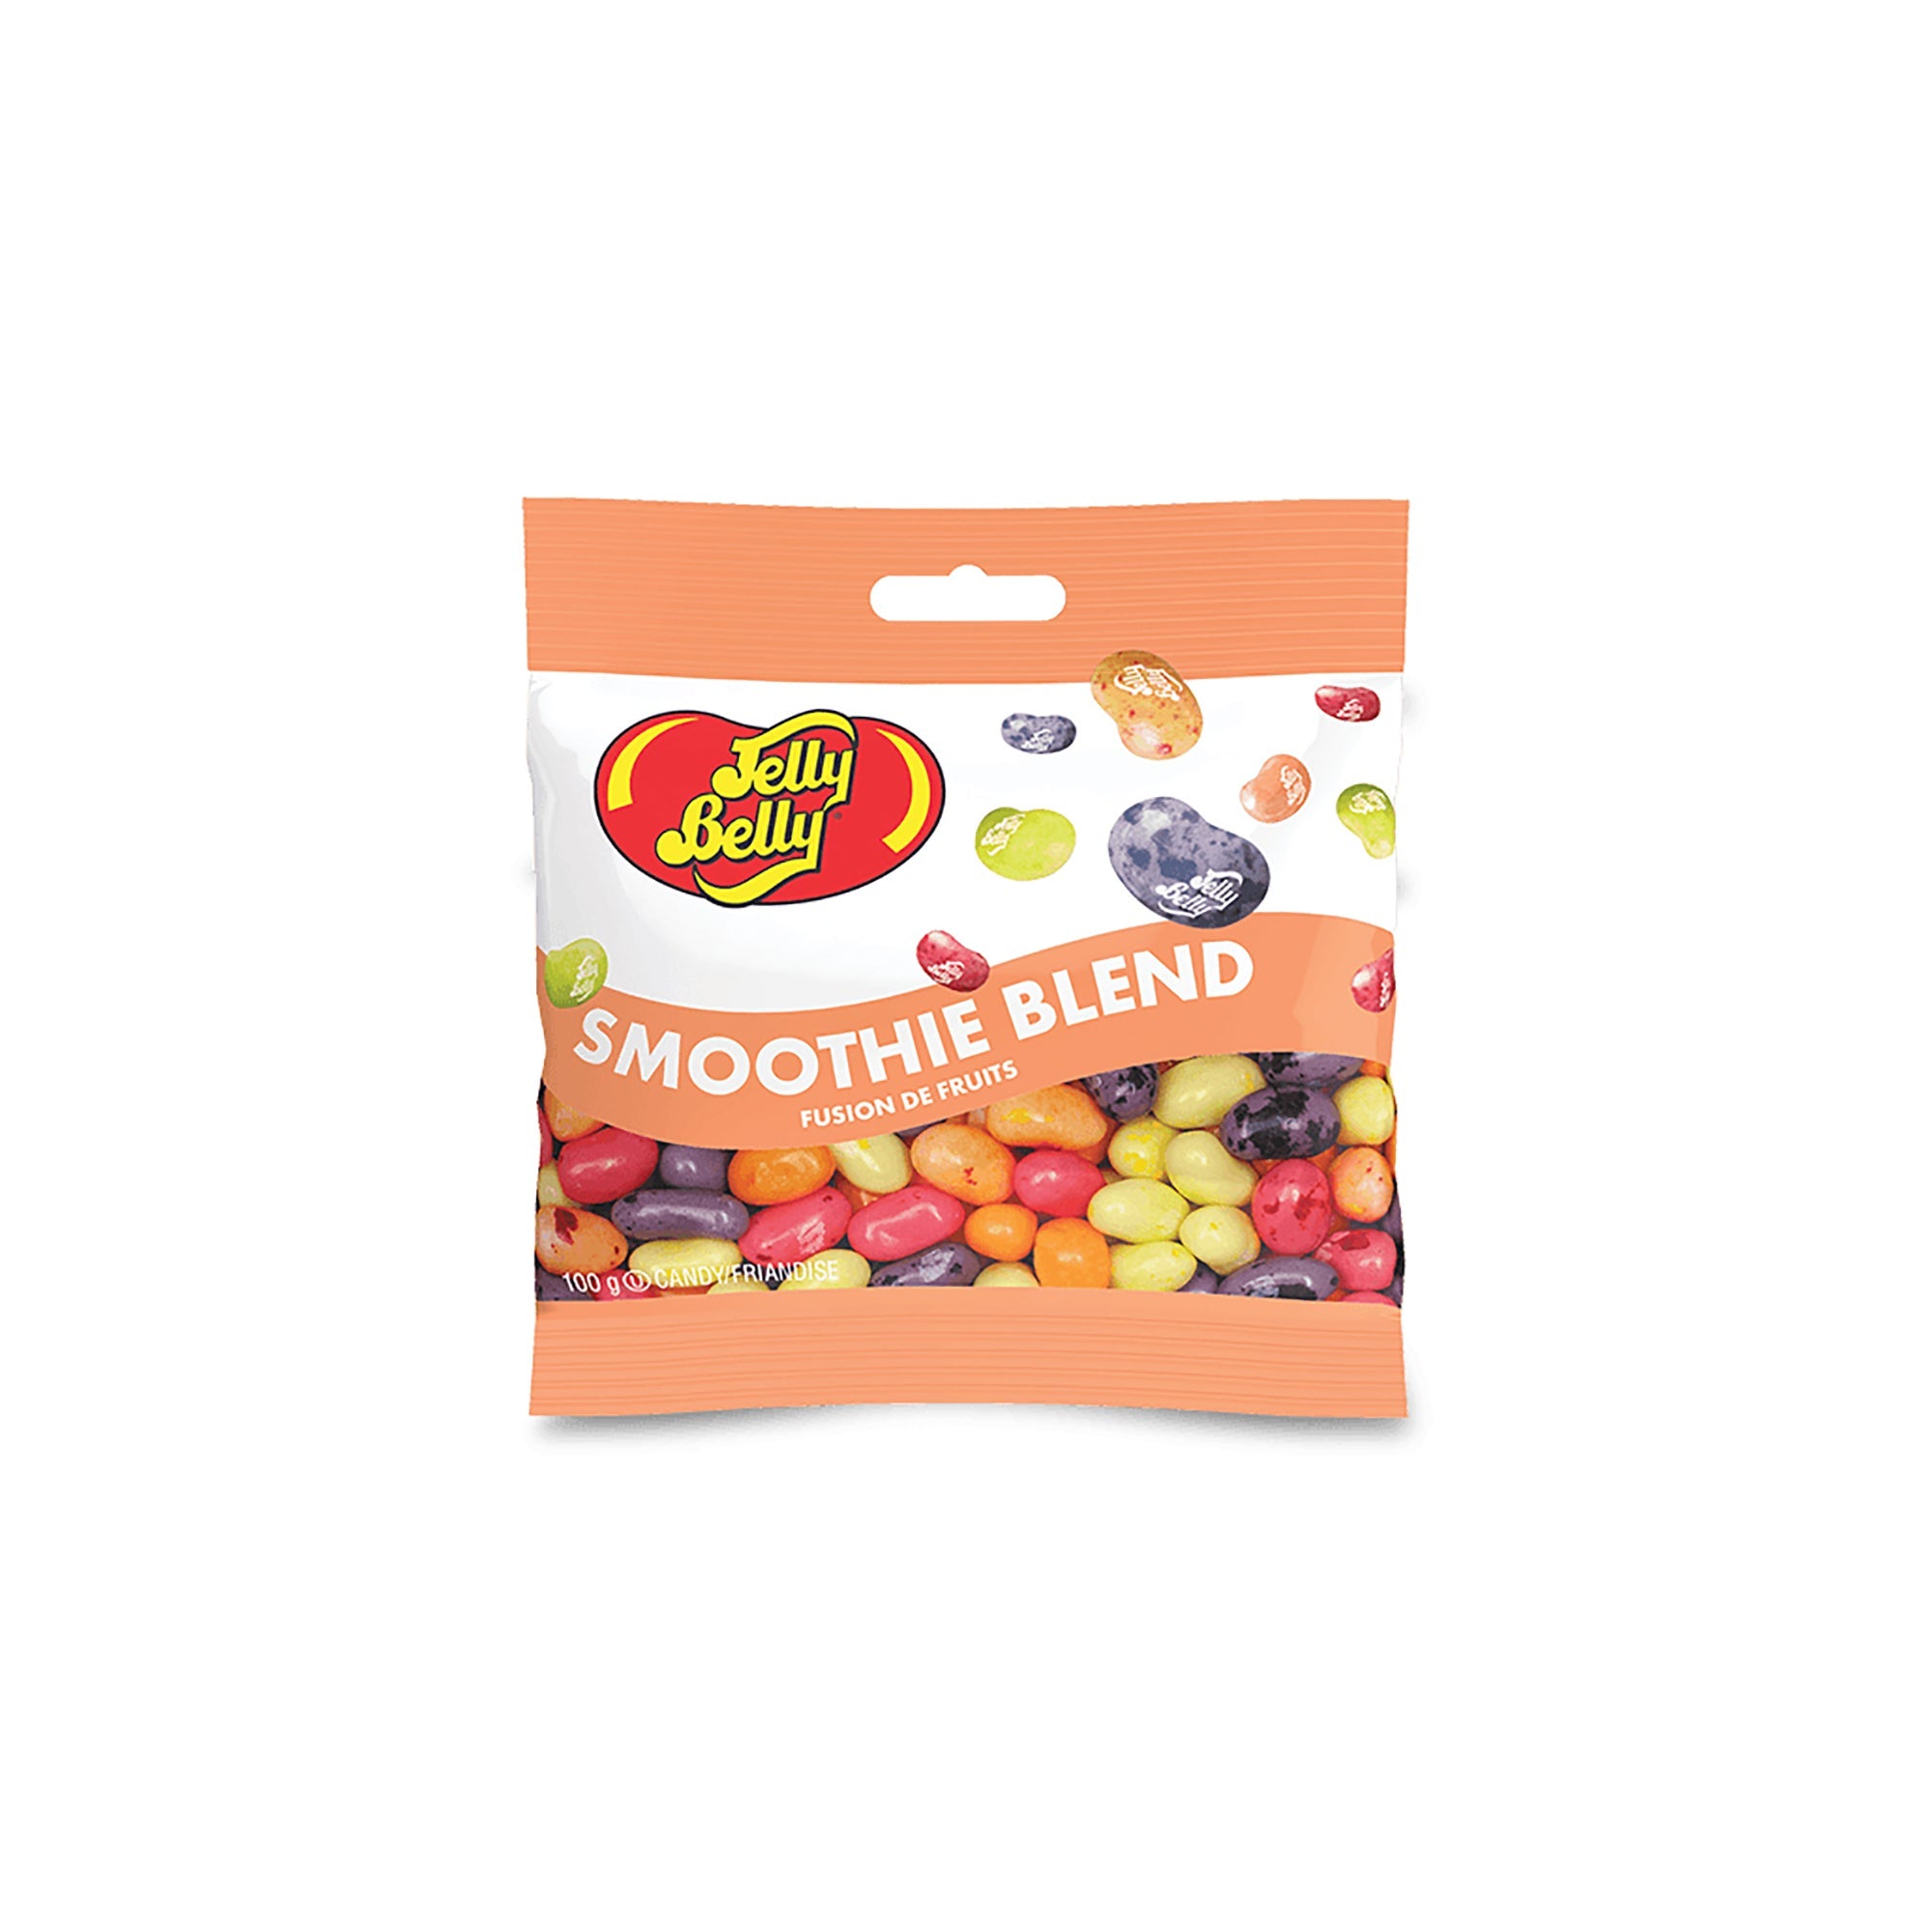 Jelly Belly Smoothie Blend Jelly Bean Candy 100g